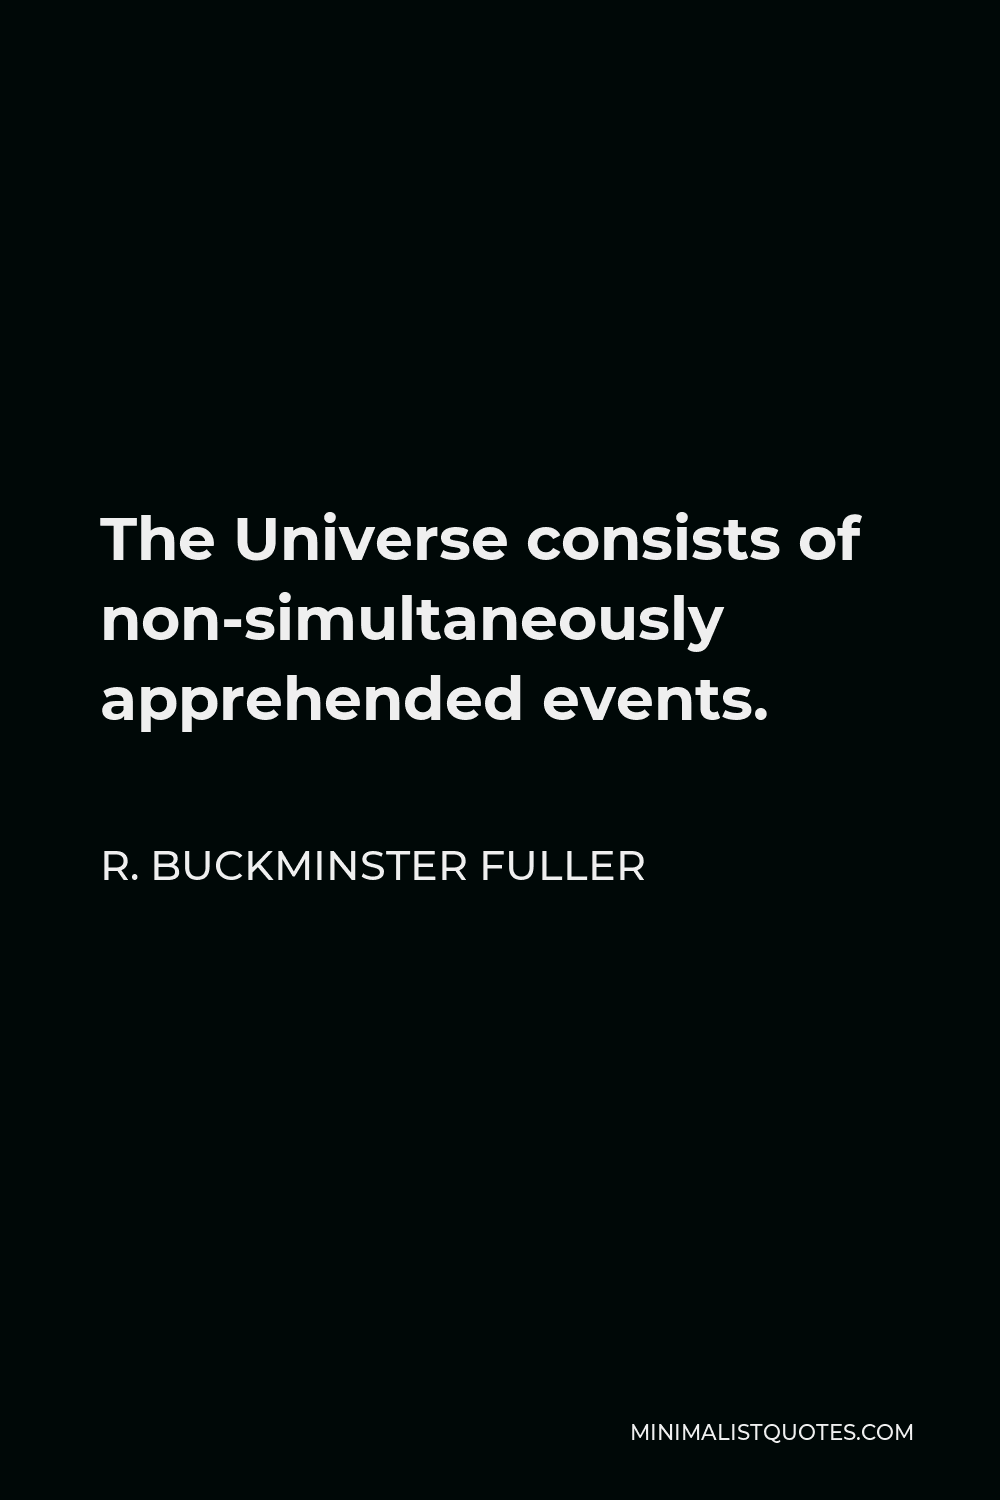 R. Buckminster Fuller Quote - The Universe consists of non-simultaneously apprehended events.